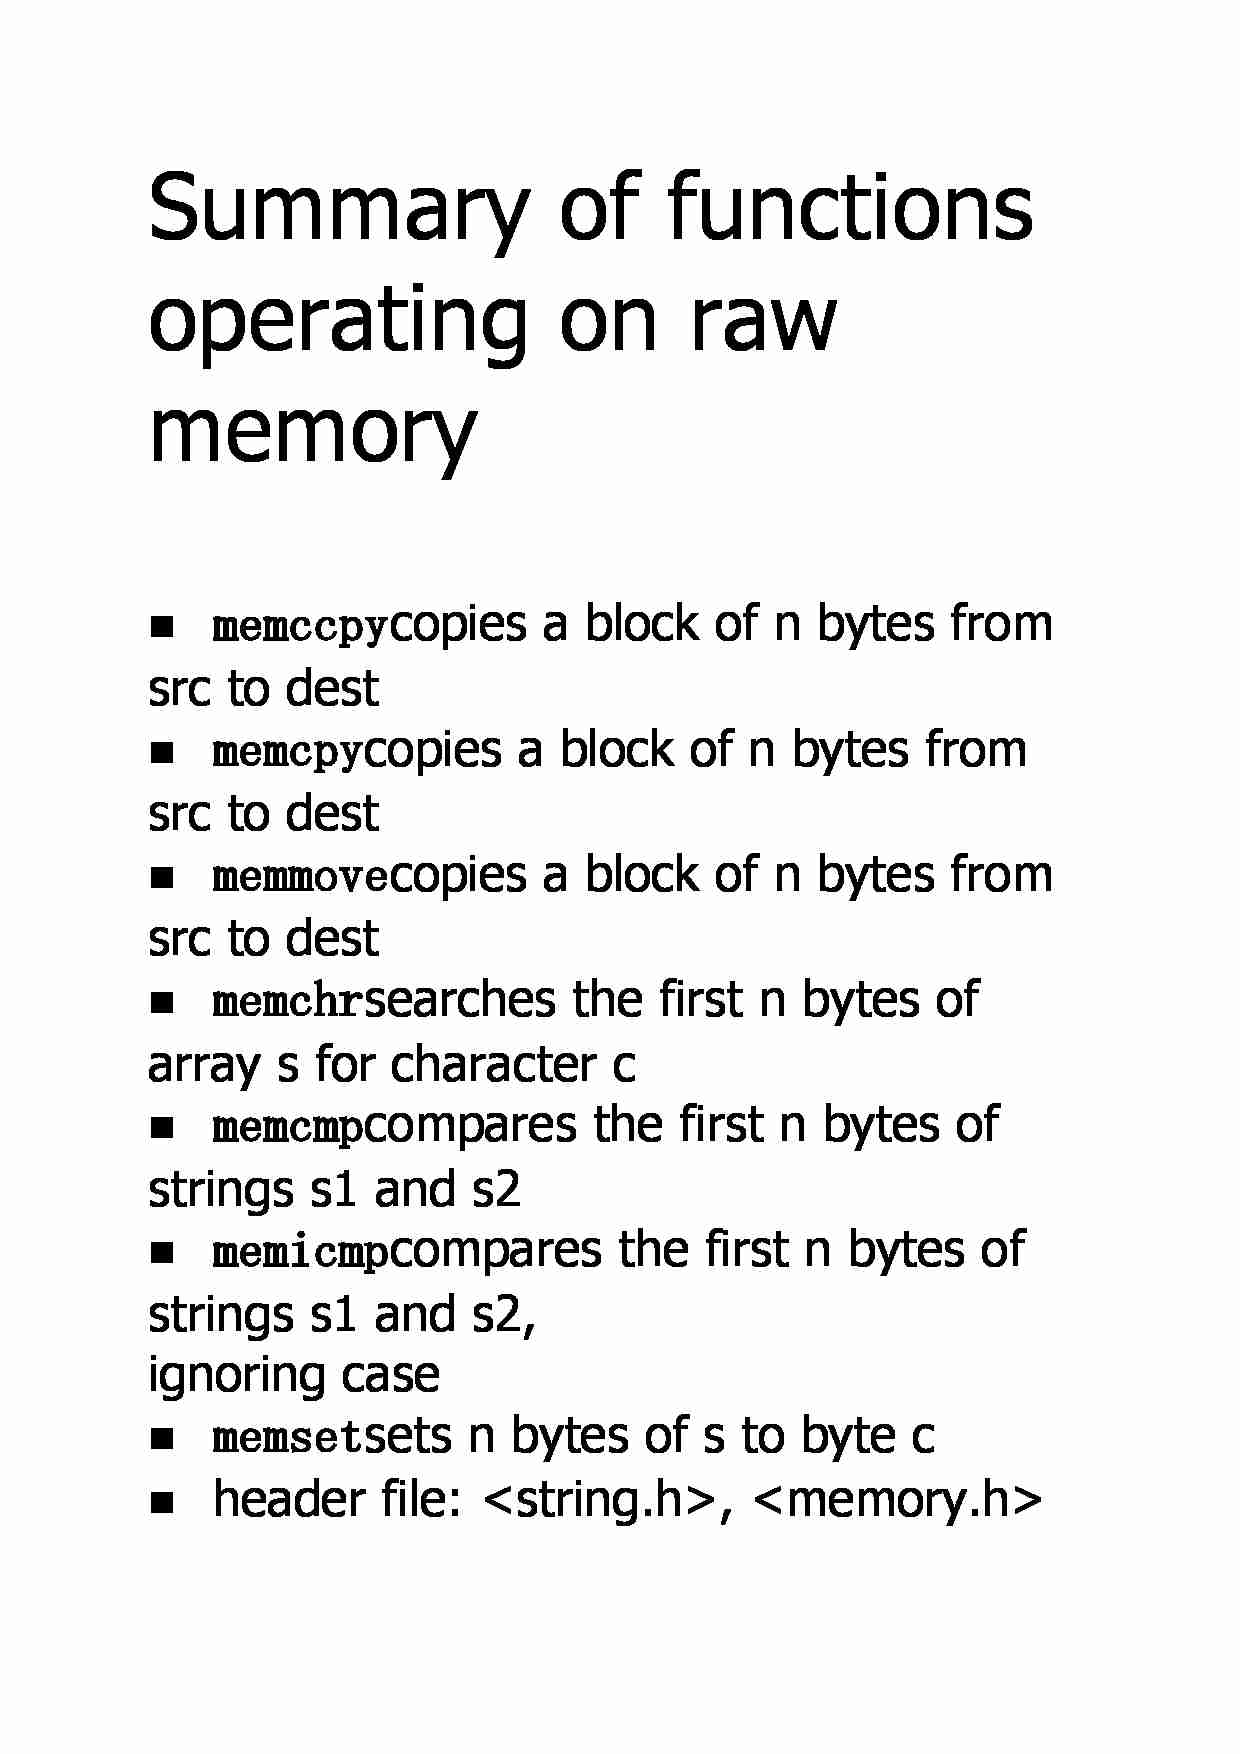 Summary of functions operating on raw memory - strona 1